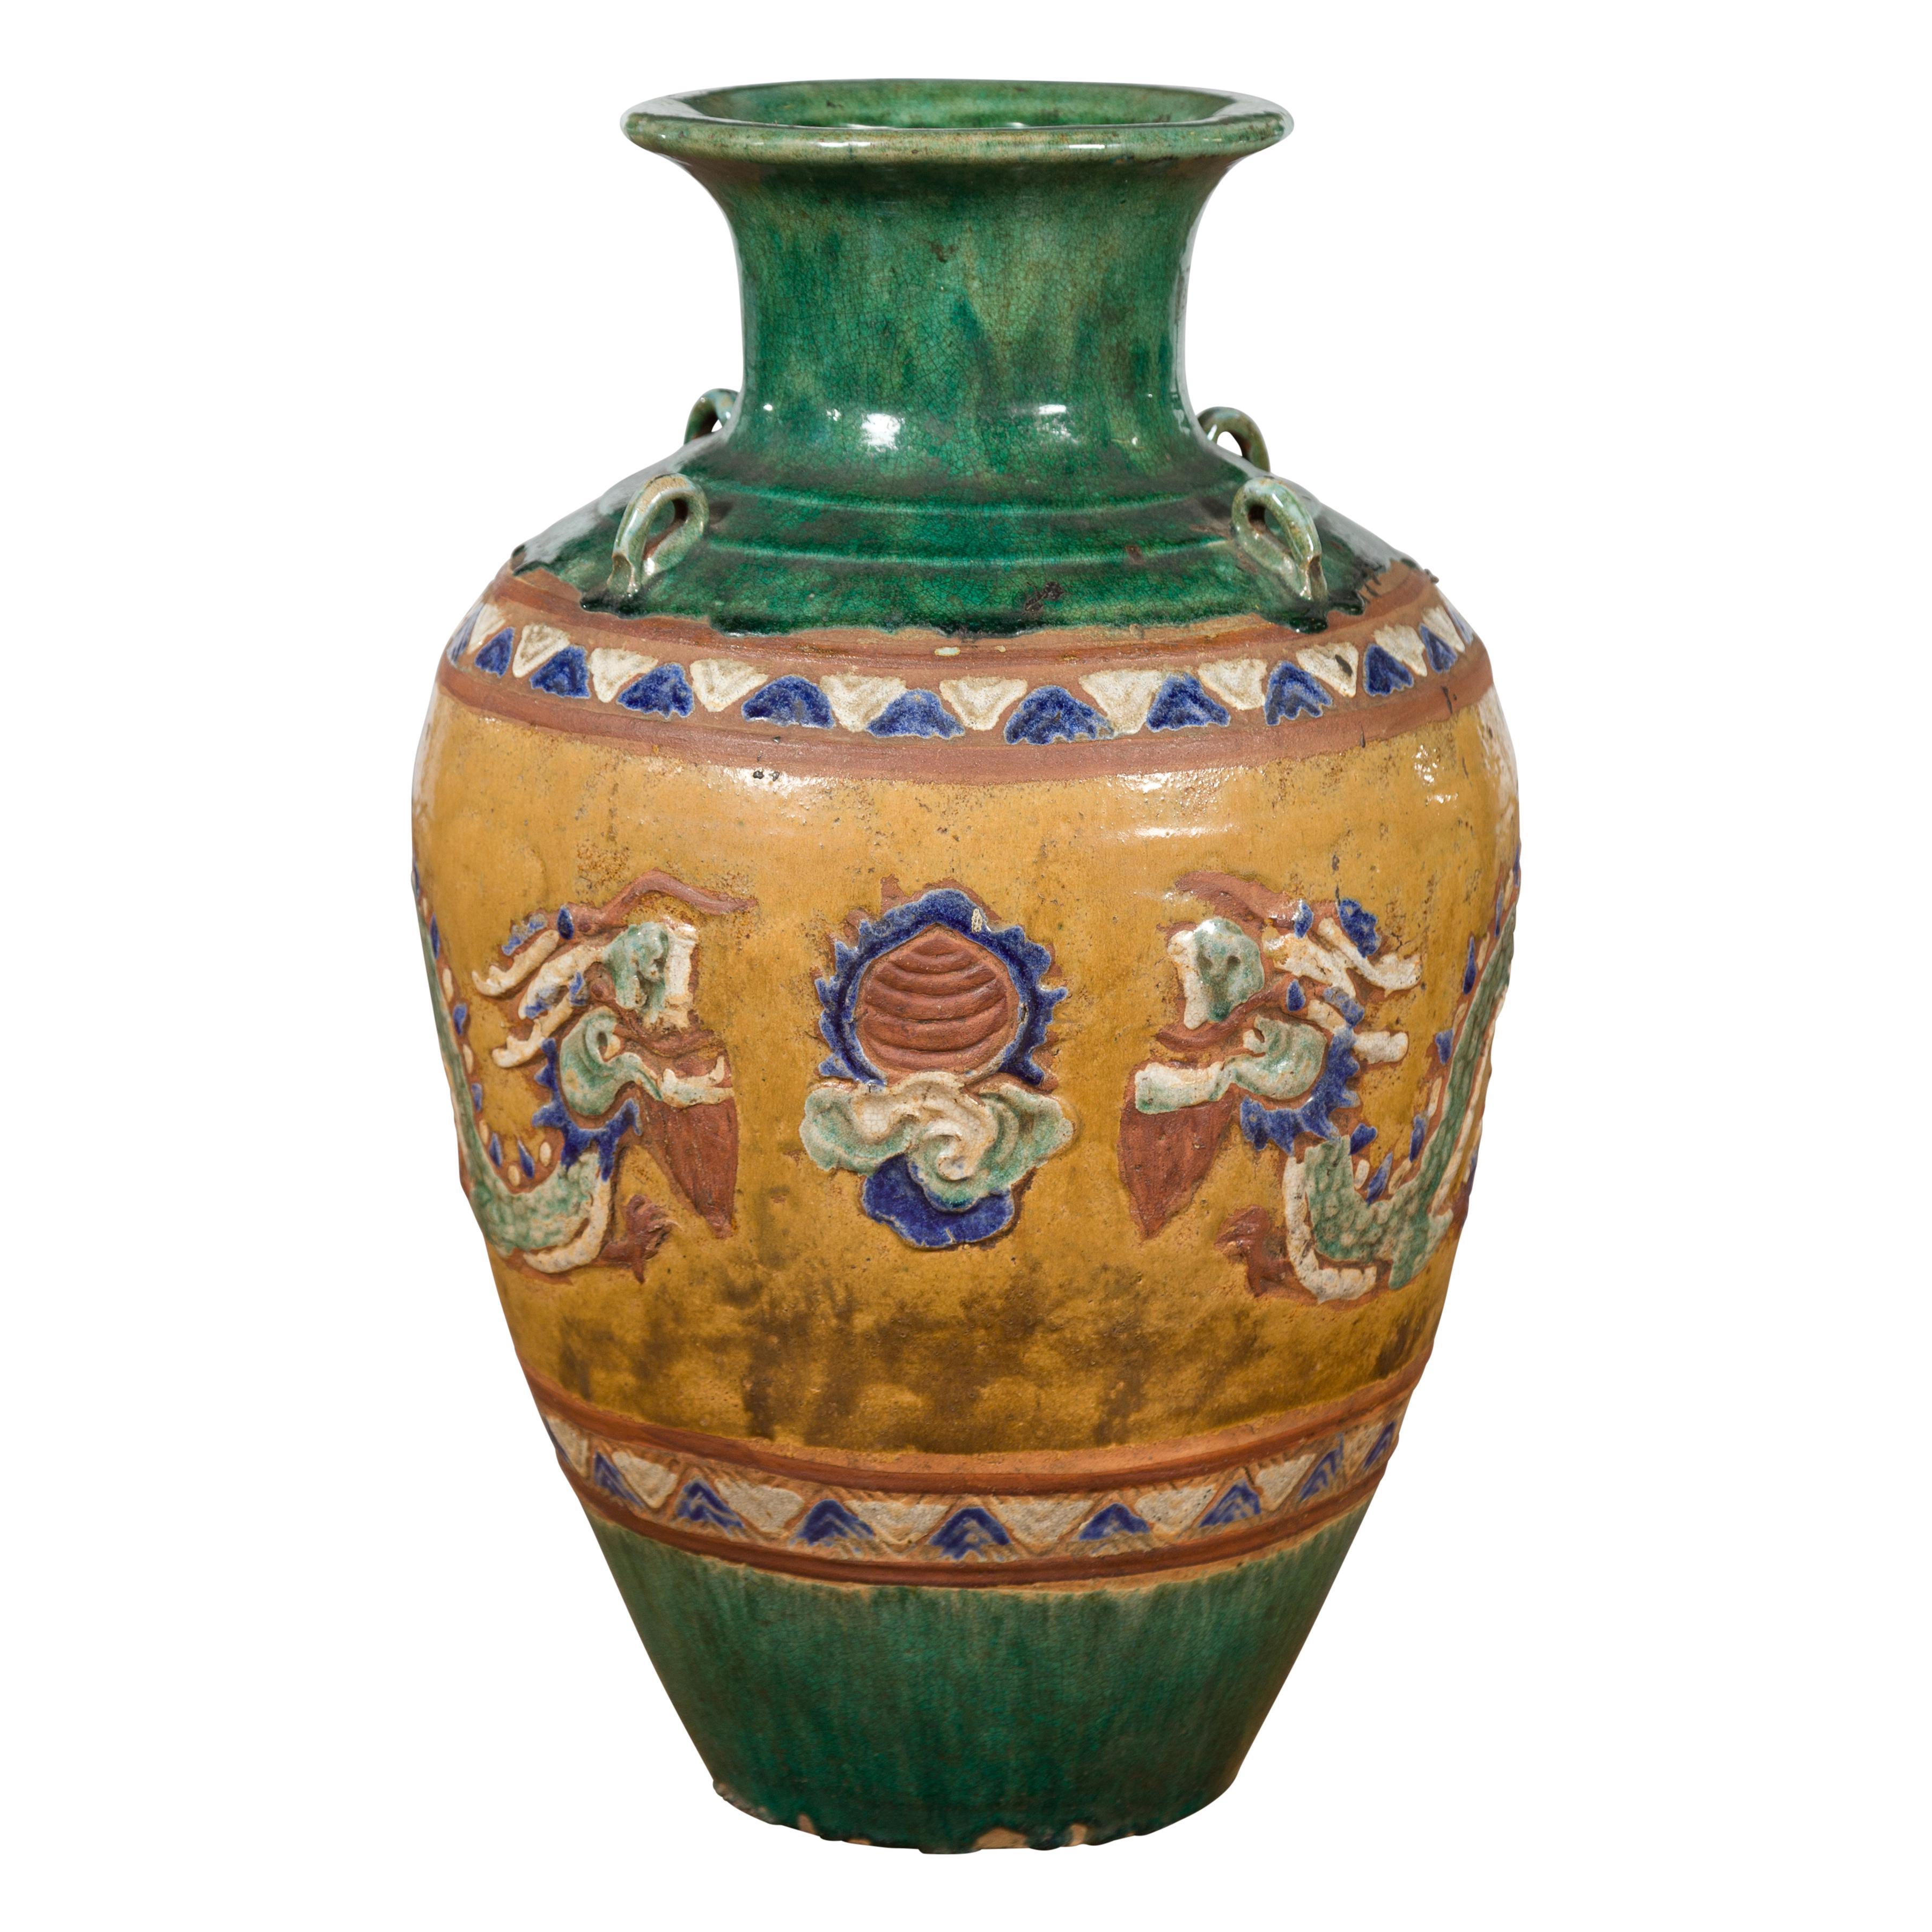 An antique Vietnamese Annamese green water jar from the 19th century, with raised dragon motifs, blue, brown and yellow accents and petite loop handles. Created in Vietnam during the 19th century, this green glazed Annamese Martaban vase is adorned